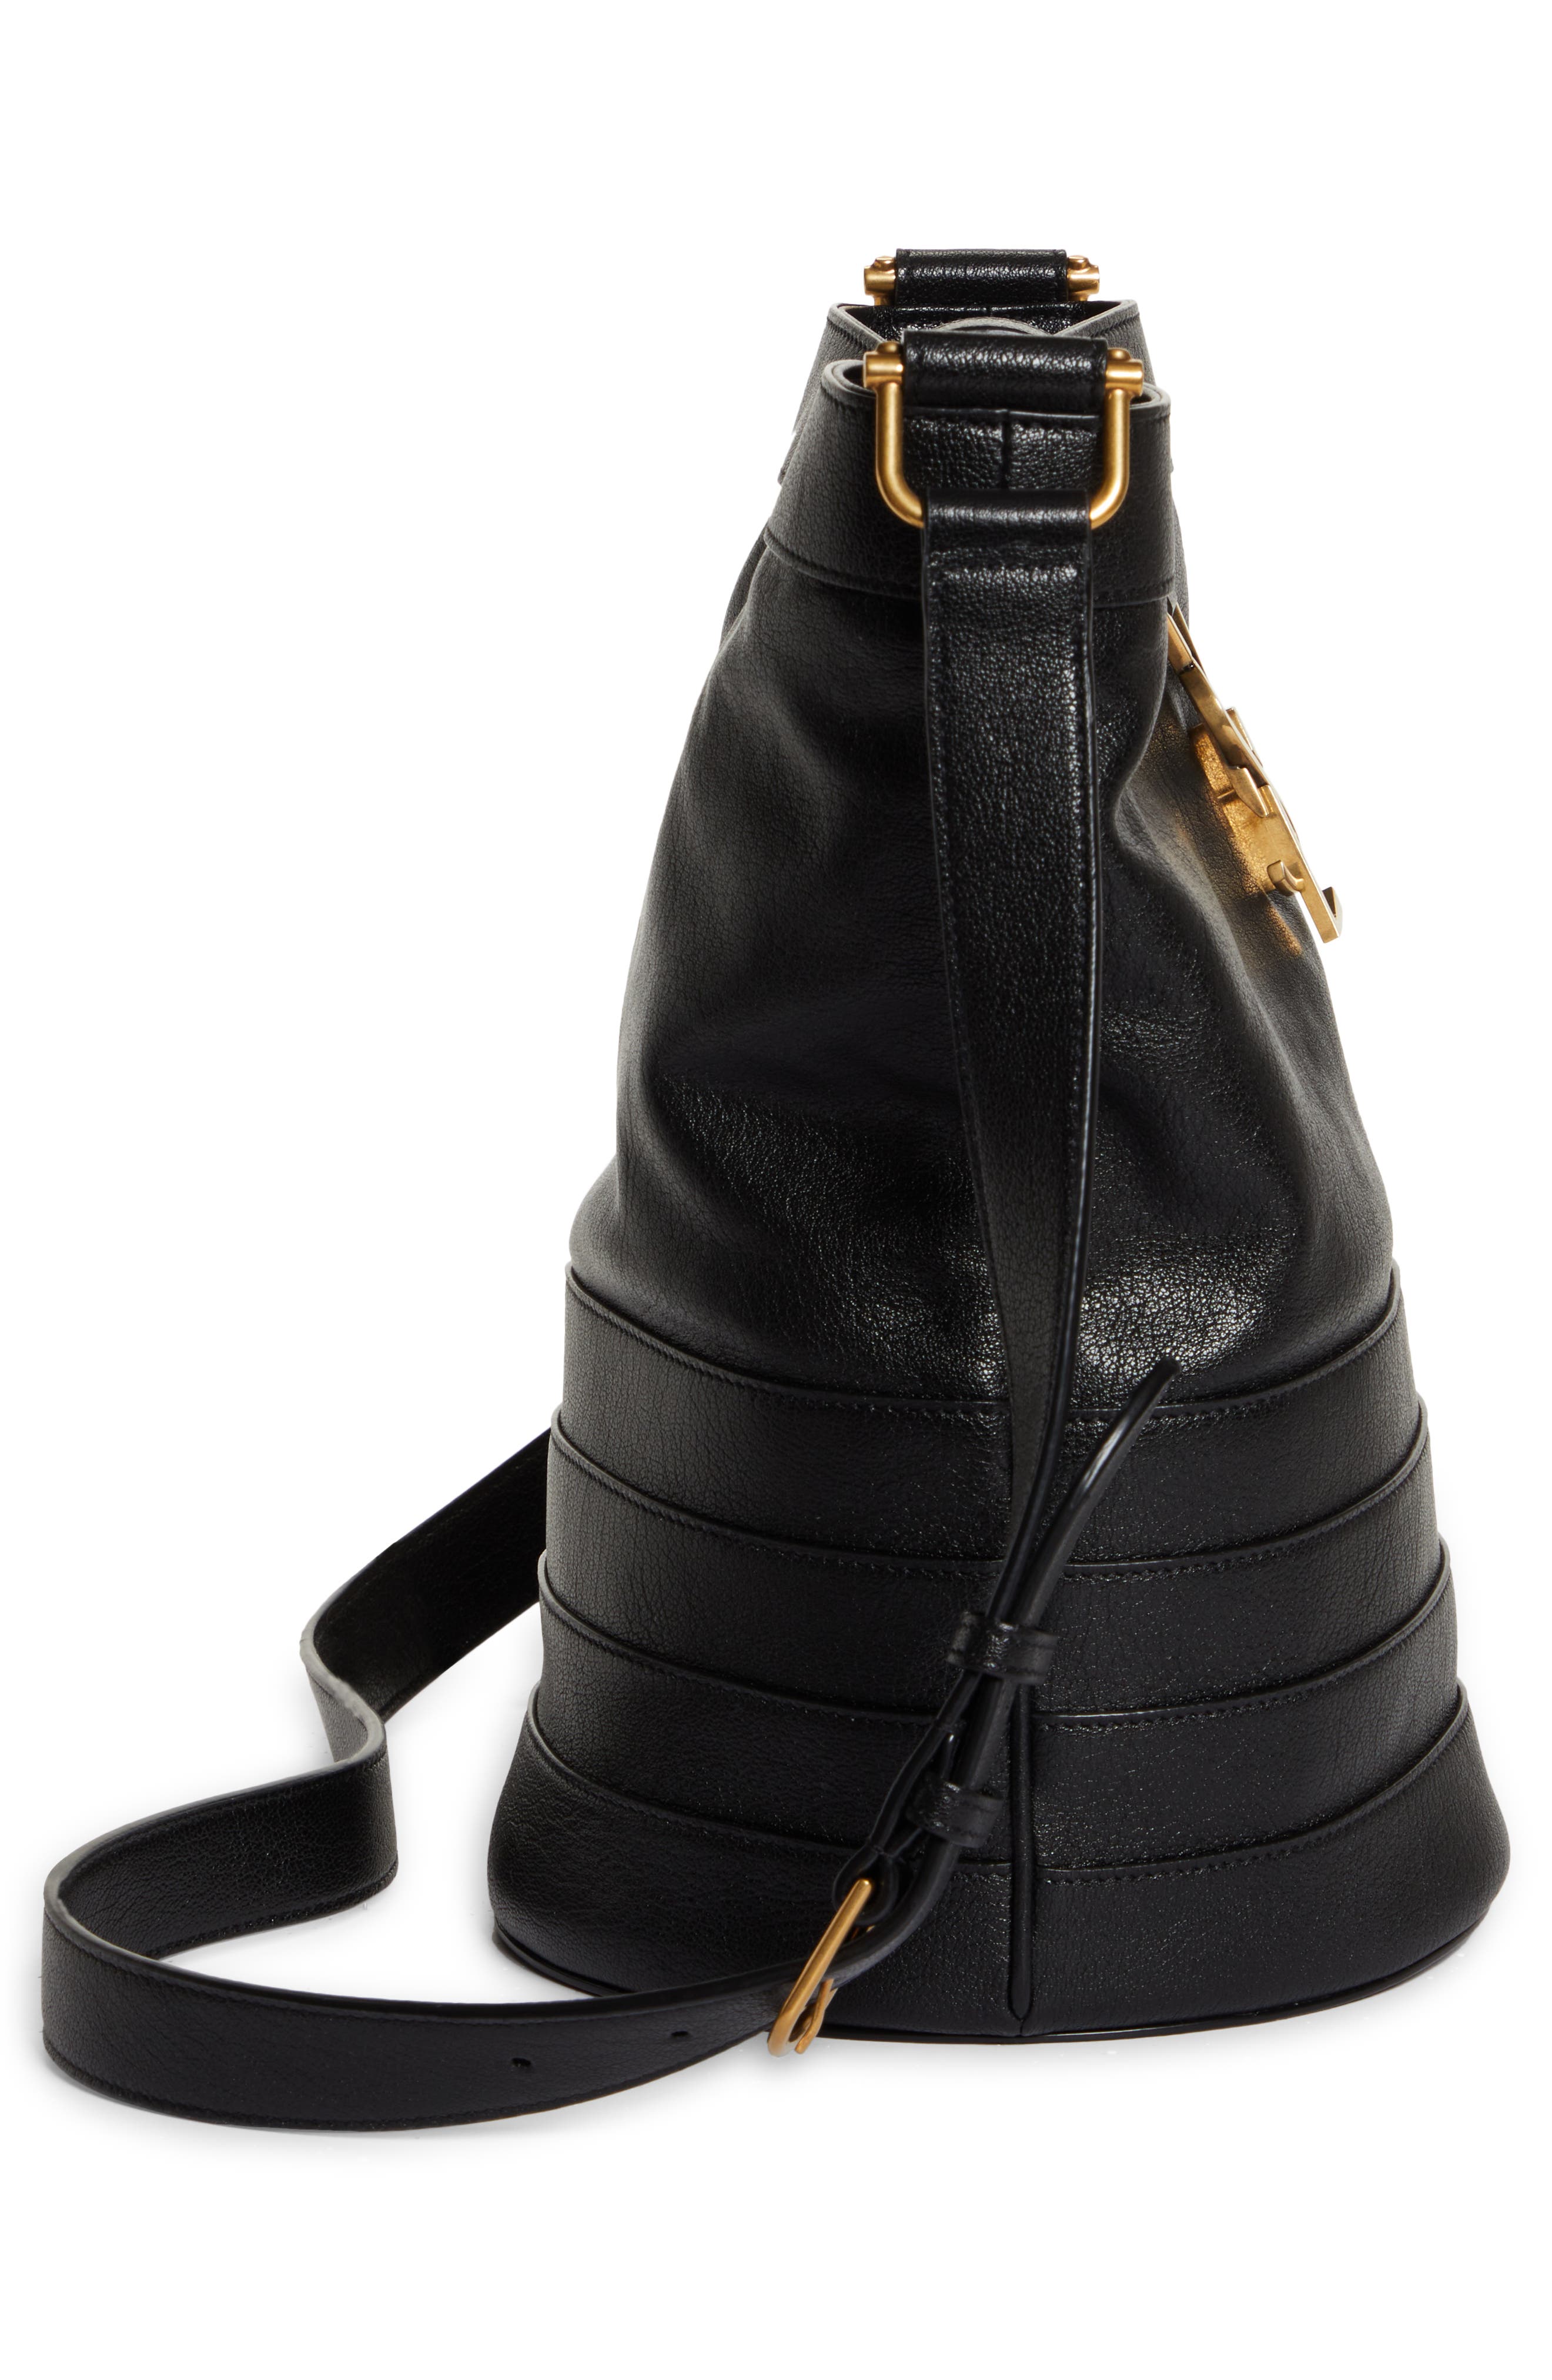 Seau Fermoir Small YSL Crossbody Bucket Bag - Shop and save up to 70% at  The Lux Outfit